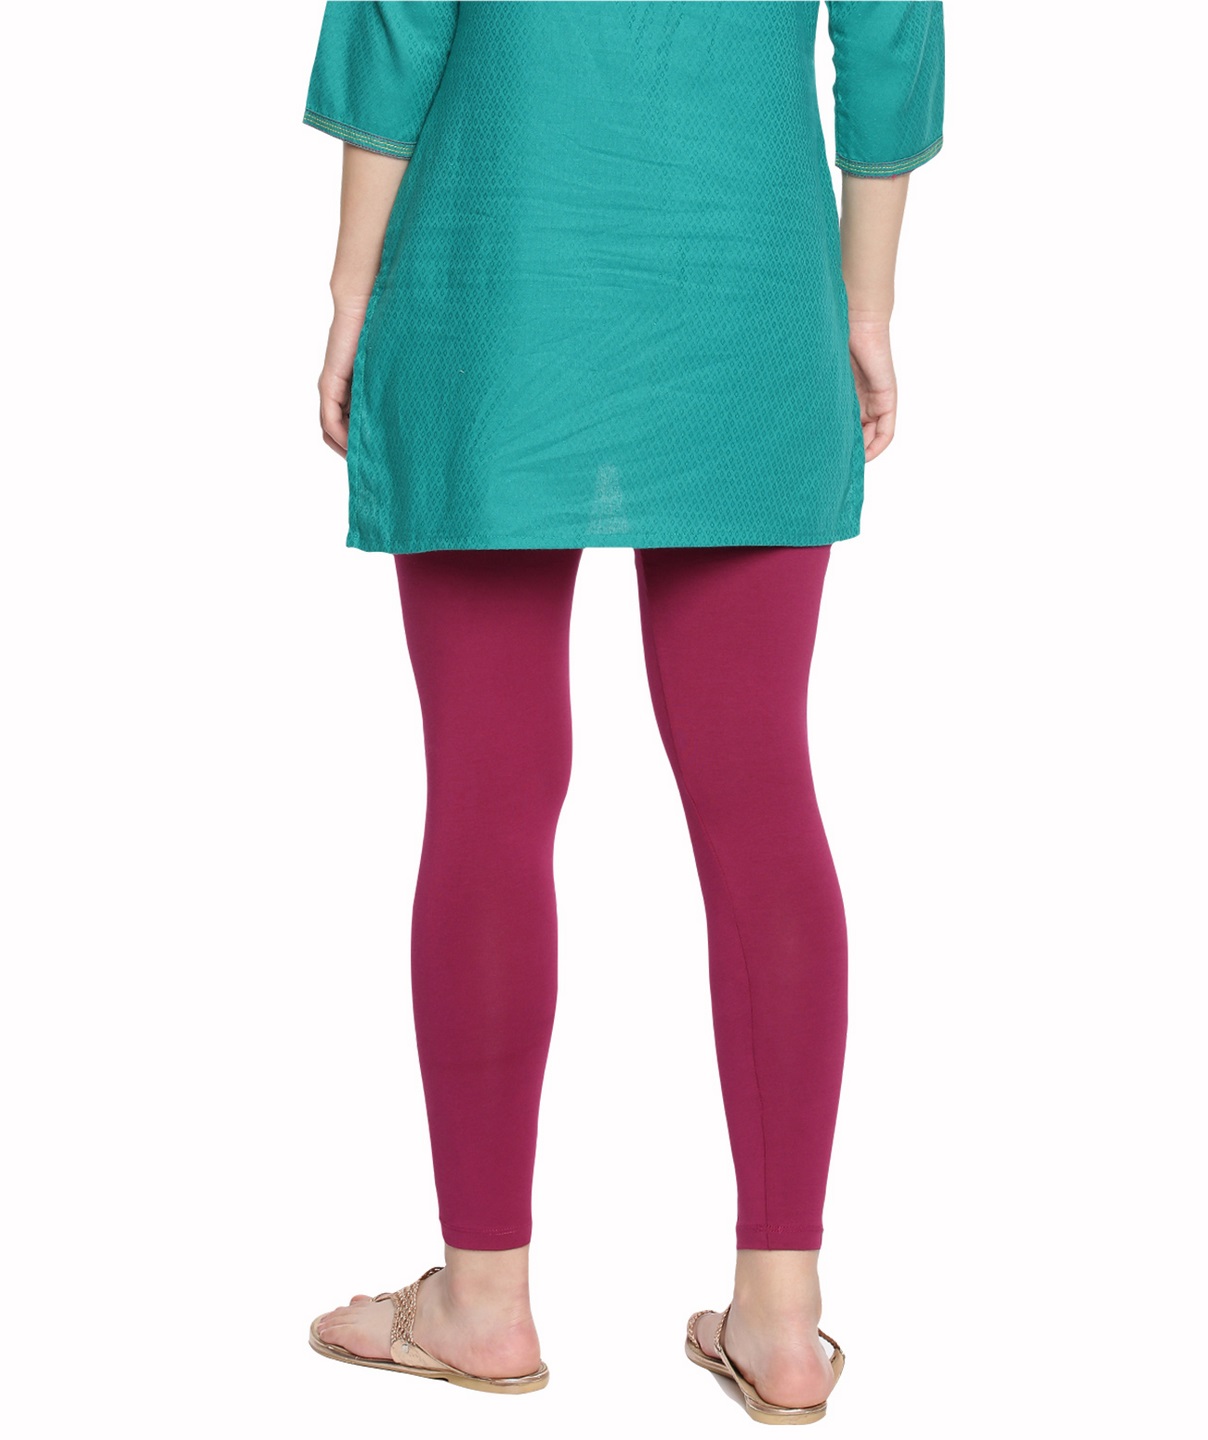 Buy GO COLORS Womens Slim Fit Cotton Ankle Length Leggings (Jade Green_XL)  at Amazon.in